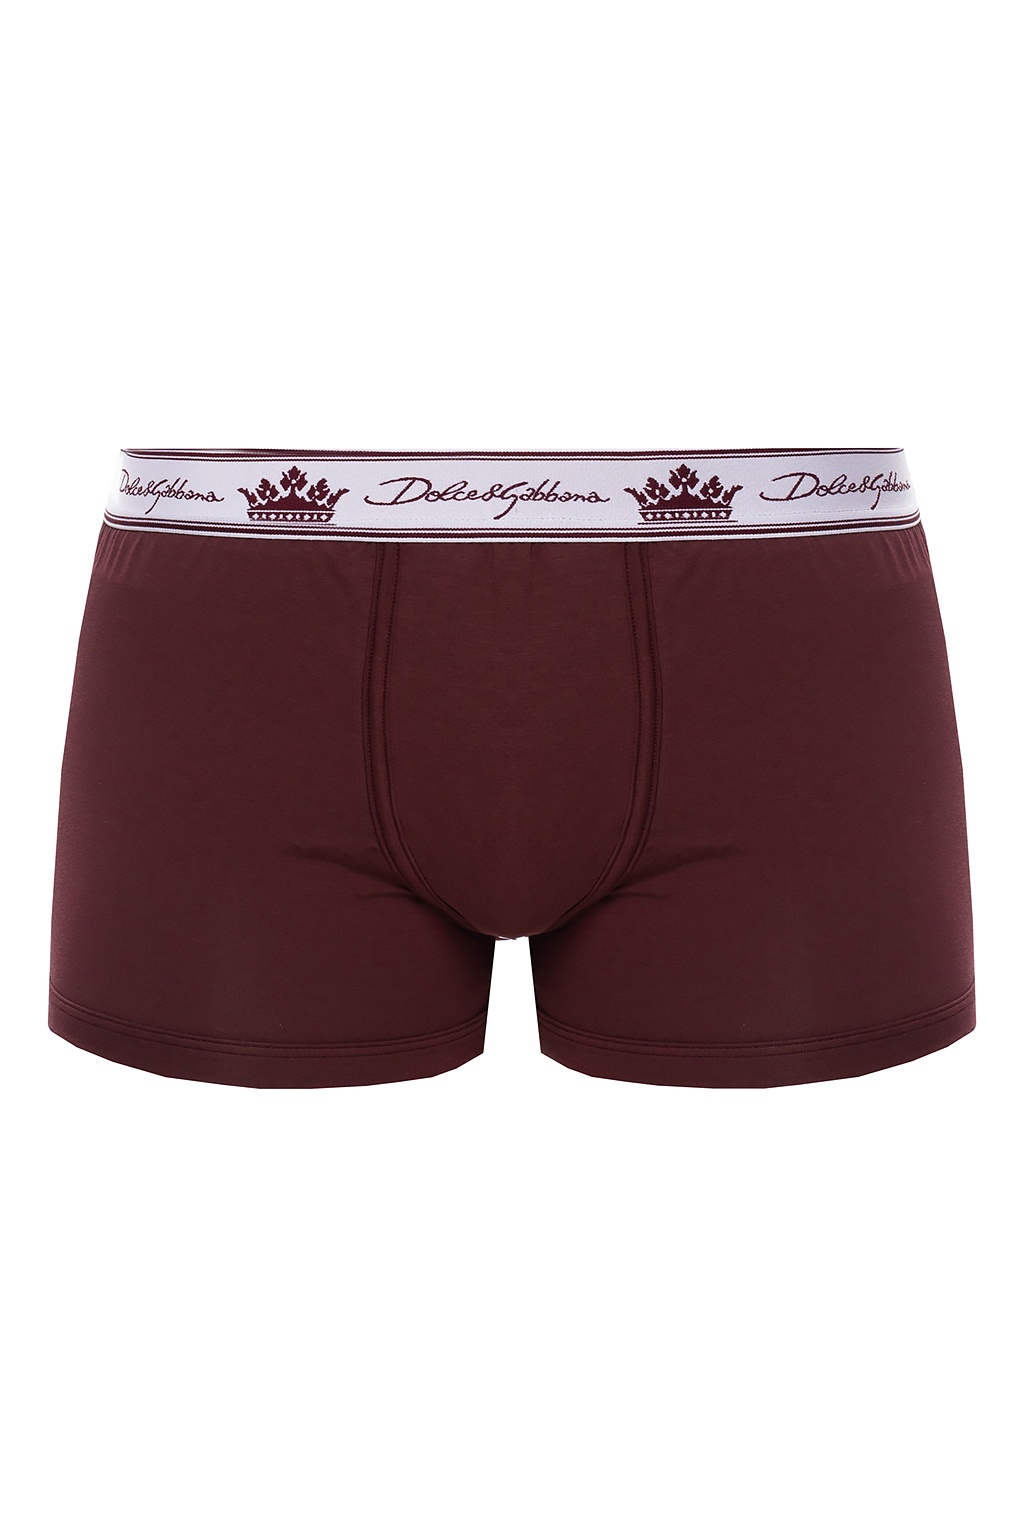 dolce and gabbana boxers